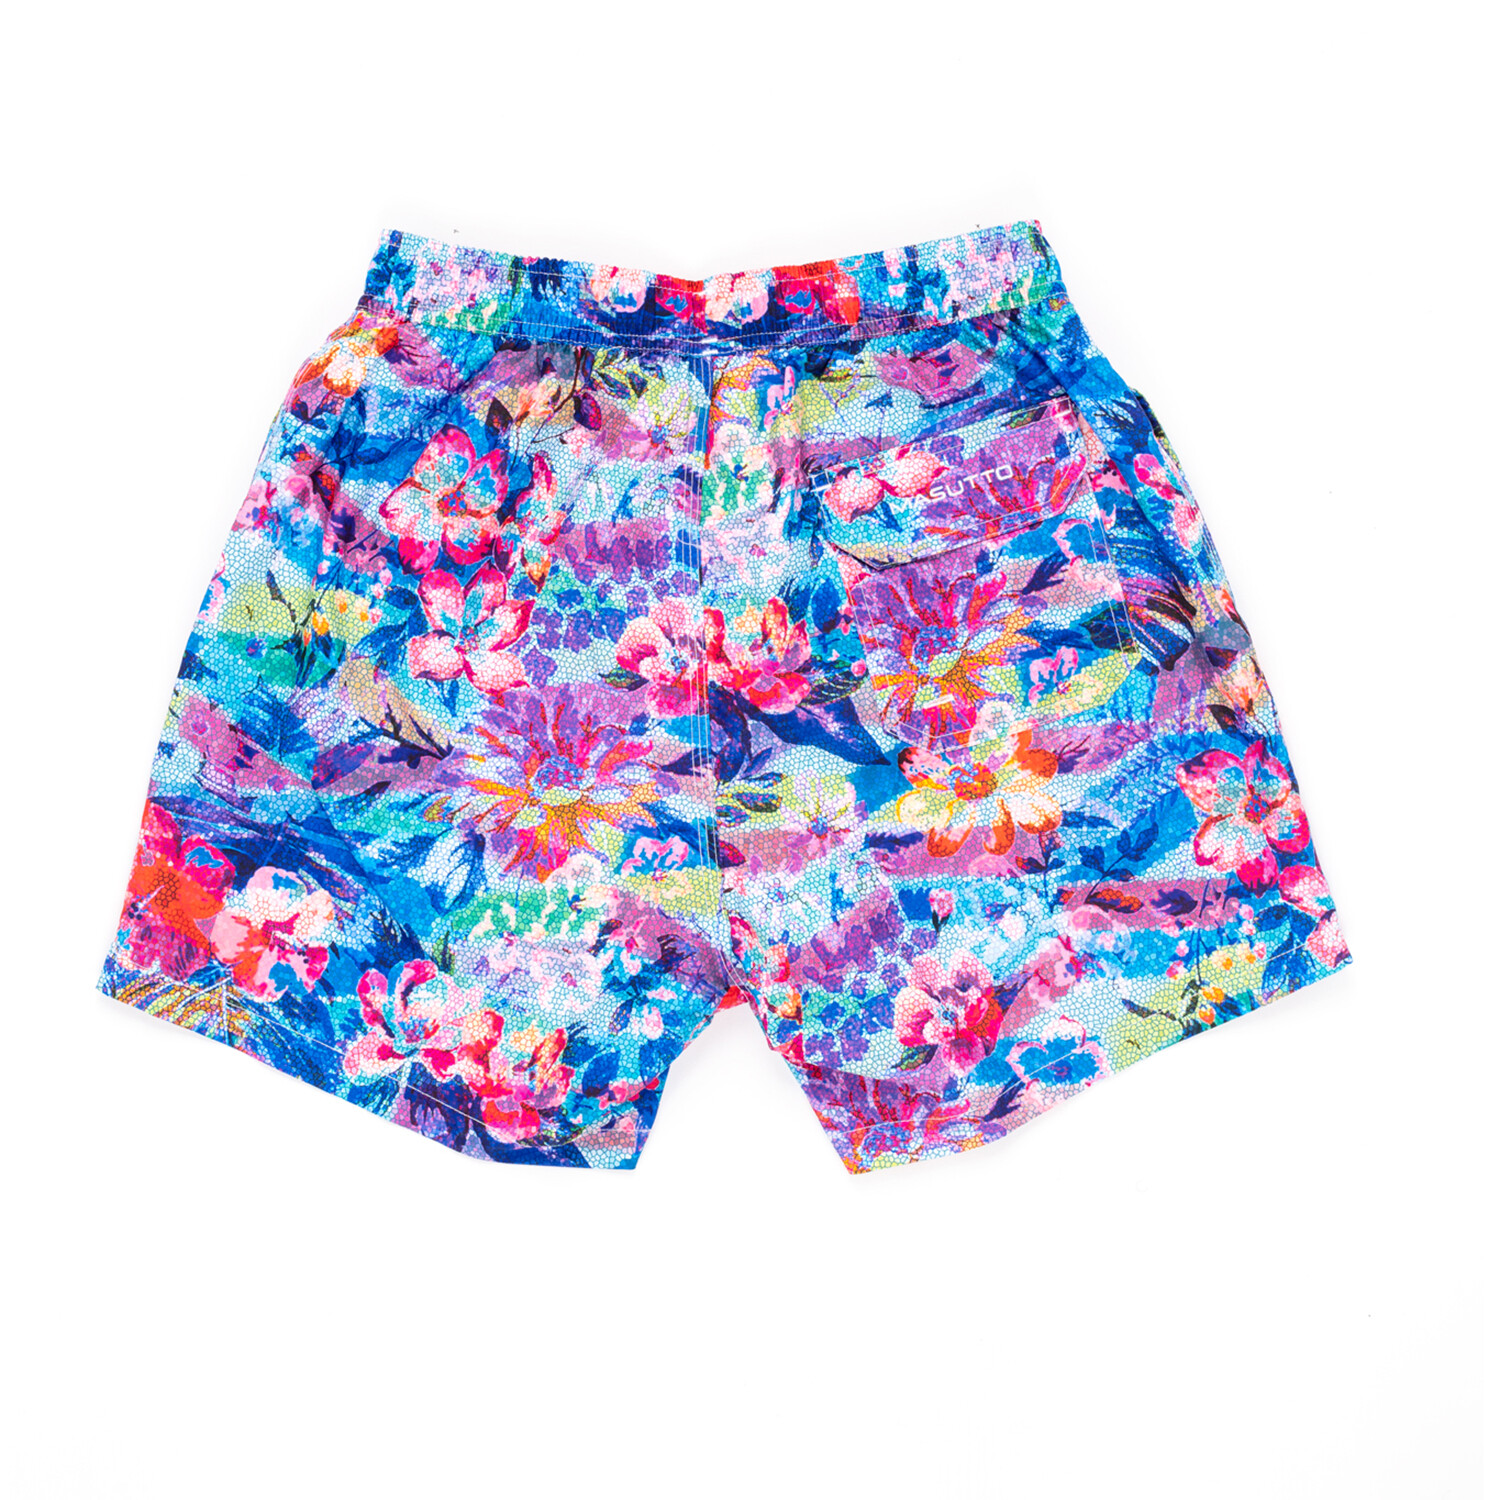 Wyatt Patterned Swim Trunks (3XL) - ToMo Clearance Event - Touch of Modern